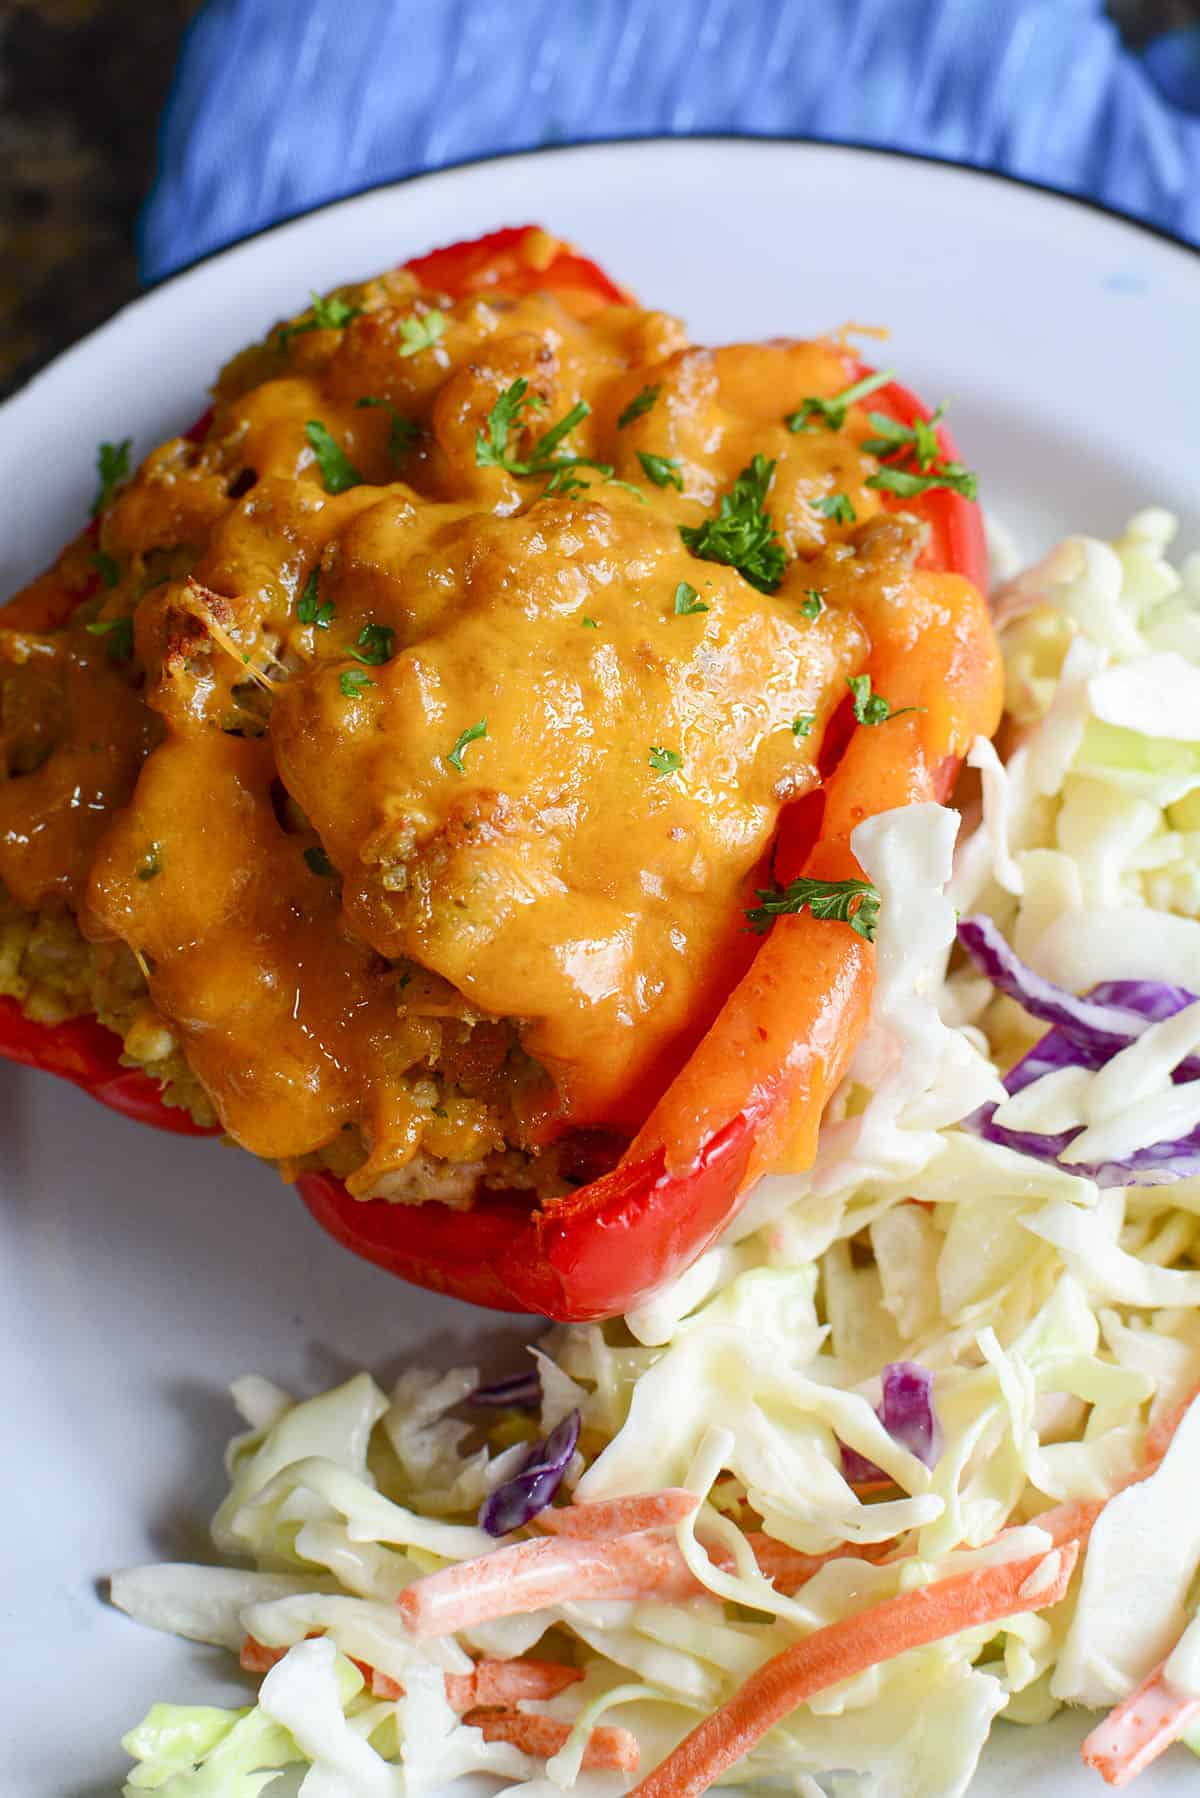 Half of a chicken stuffed red pepper with creamy coleslaw beside it.